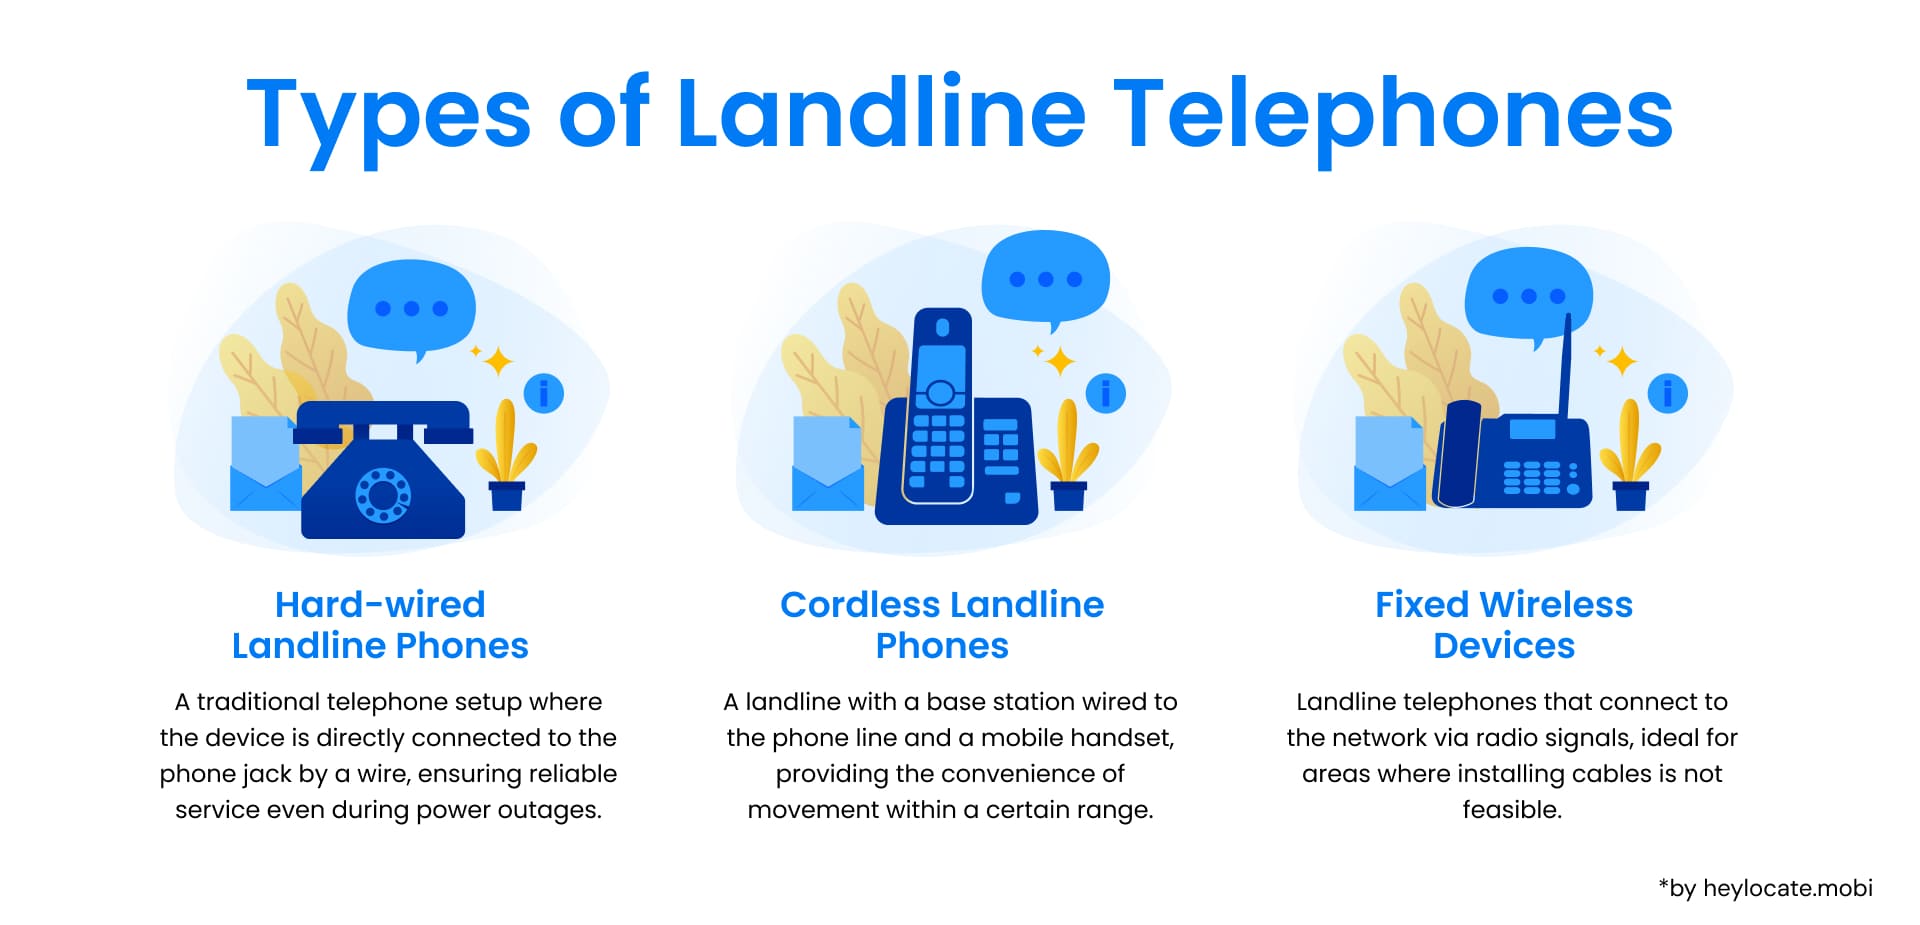 Variants of Landline Telephones: From traditional hard-wired to flexible fixed wireless devices